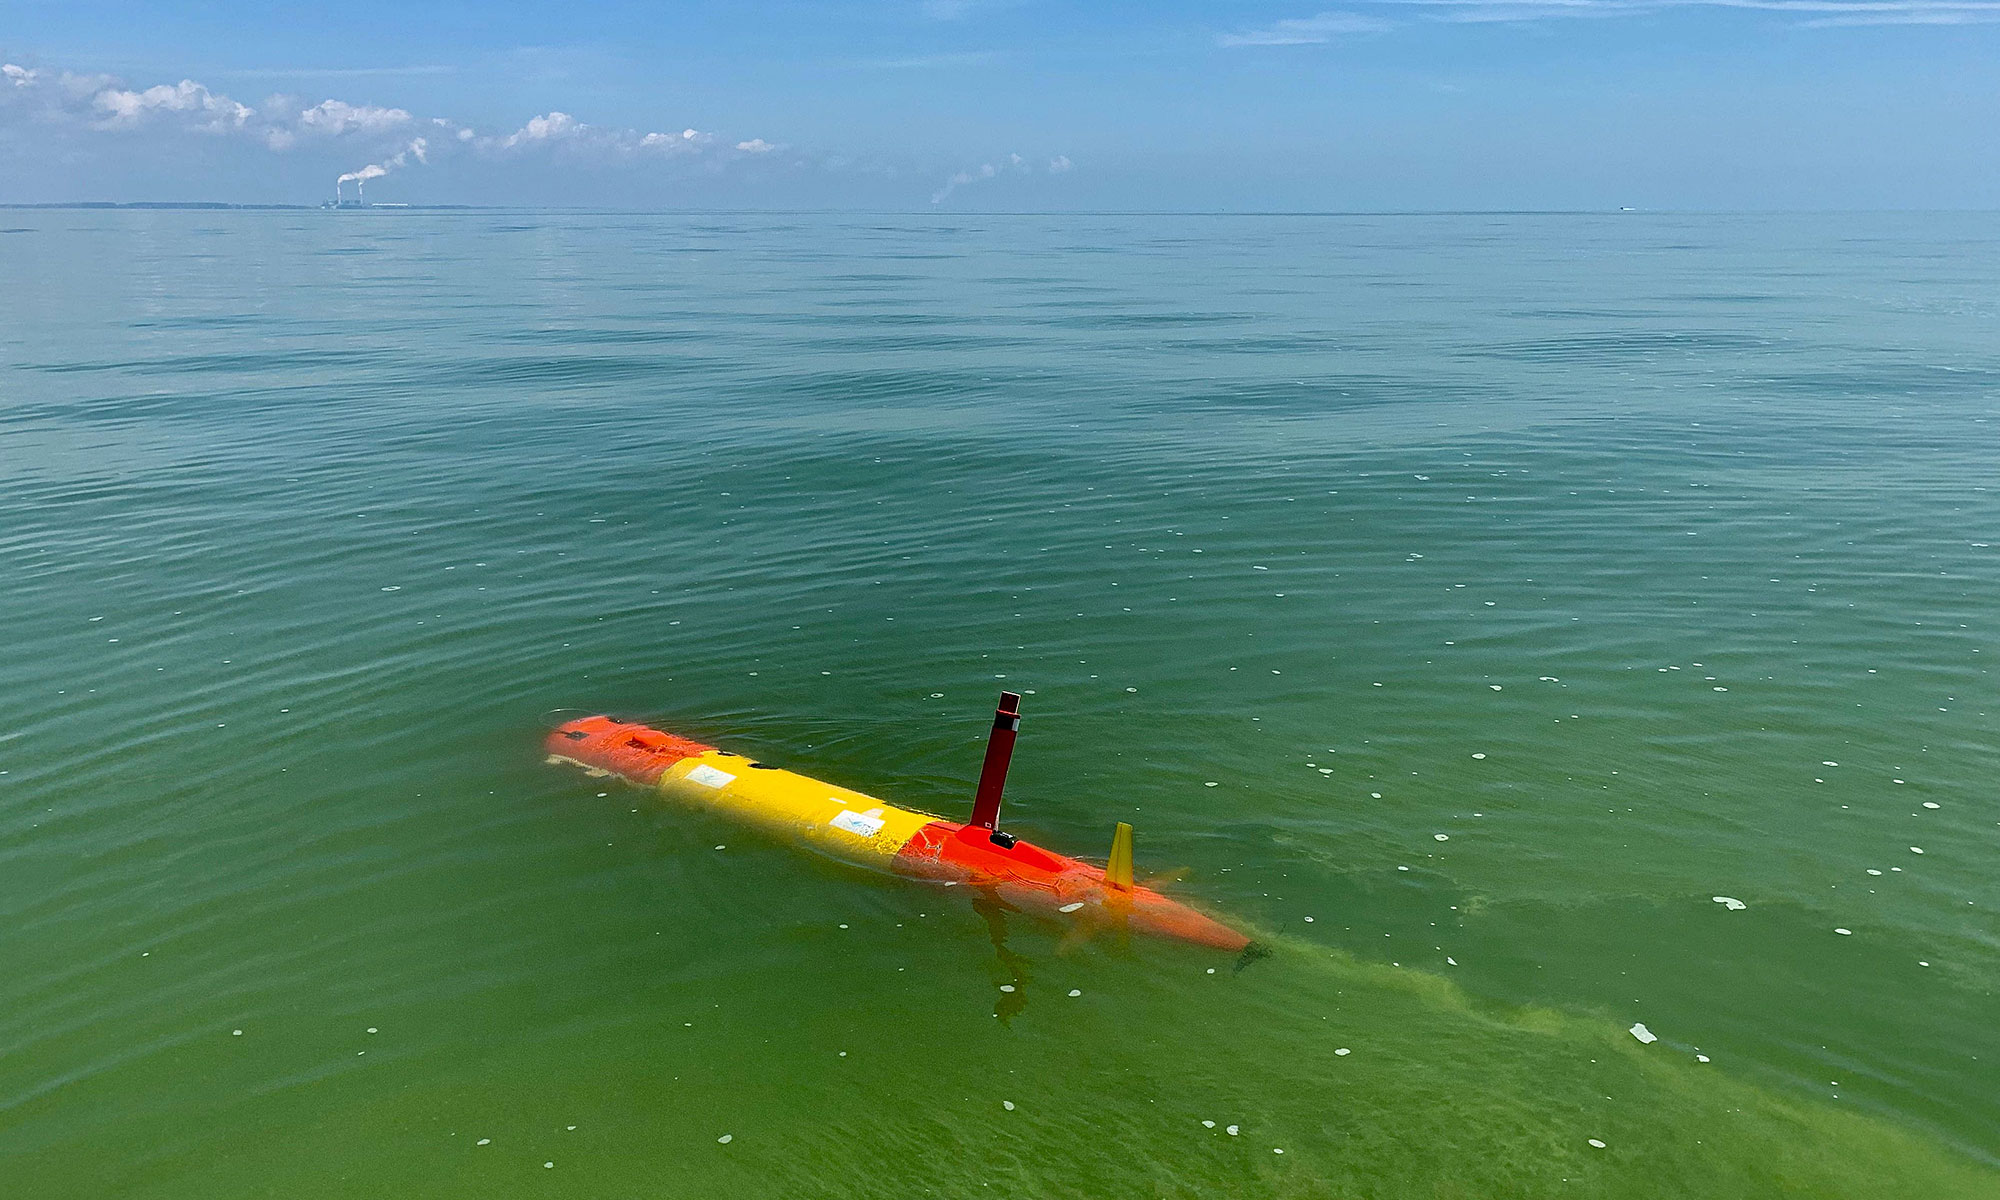 long-range autonomous underwater vehicles makes its way through the green, algae-rich waters of Lake Erie